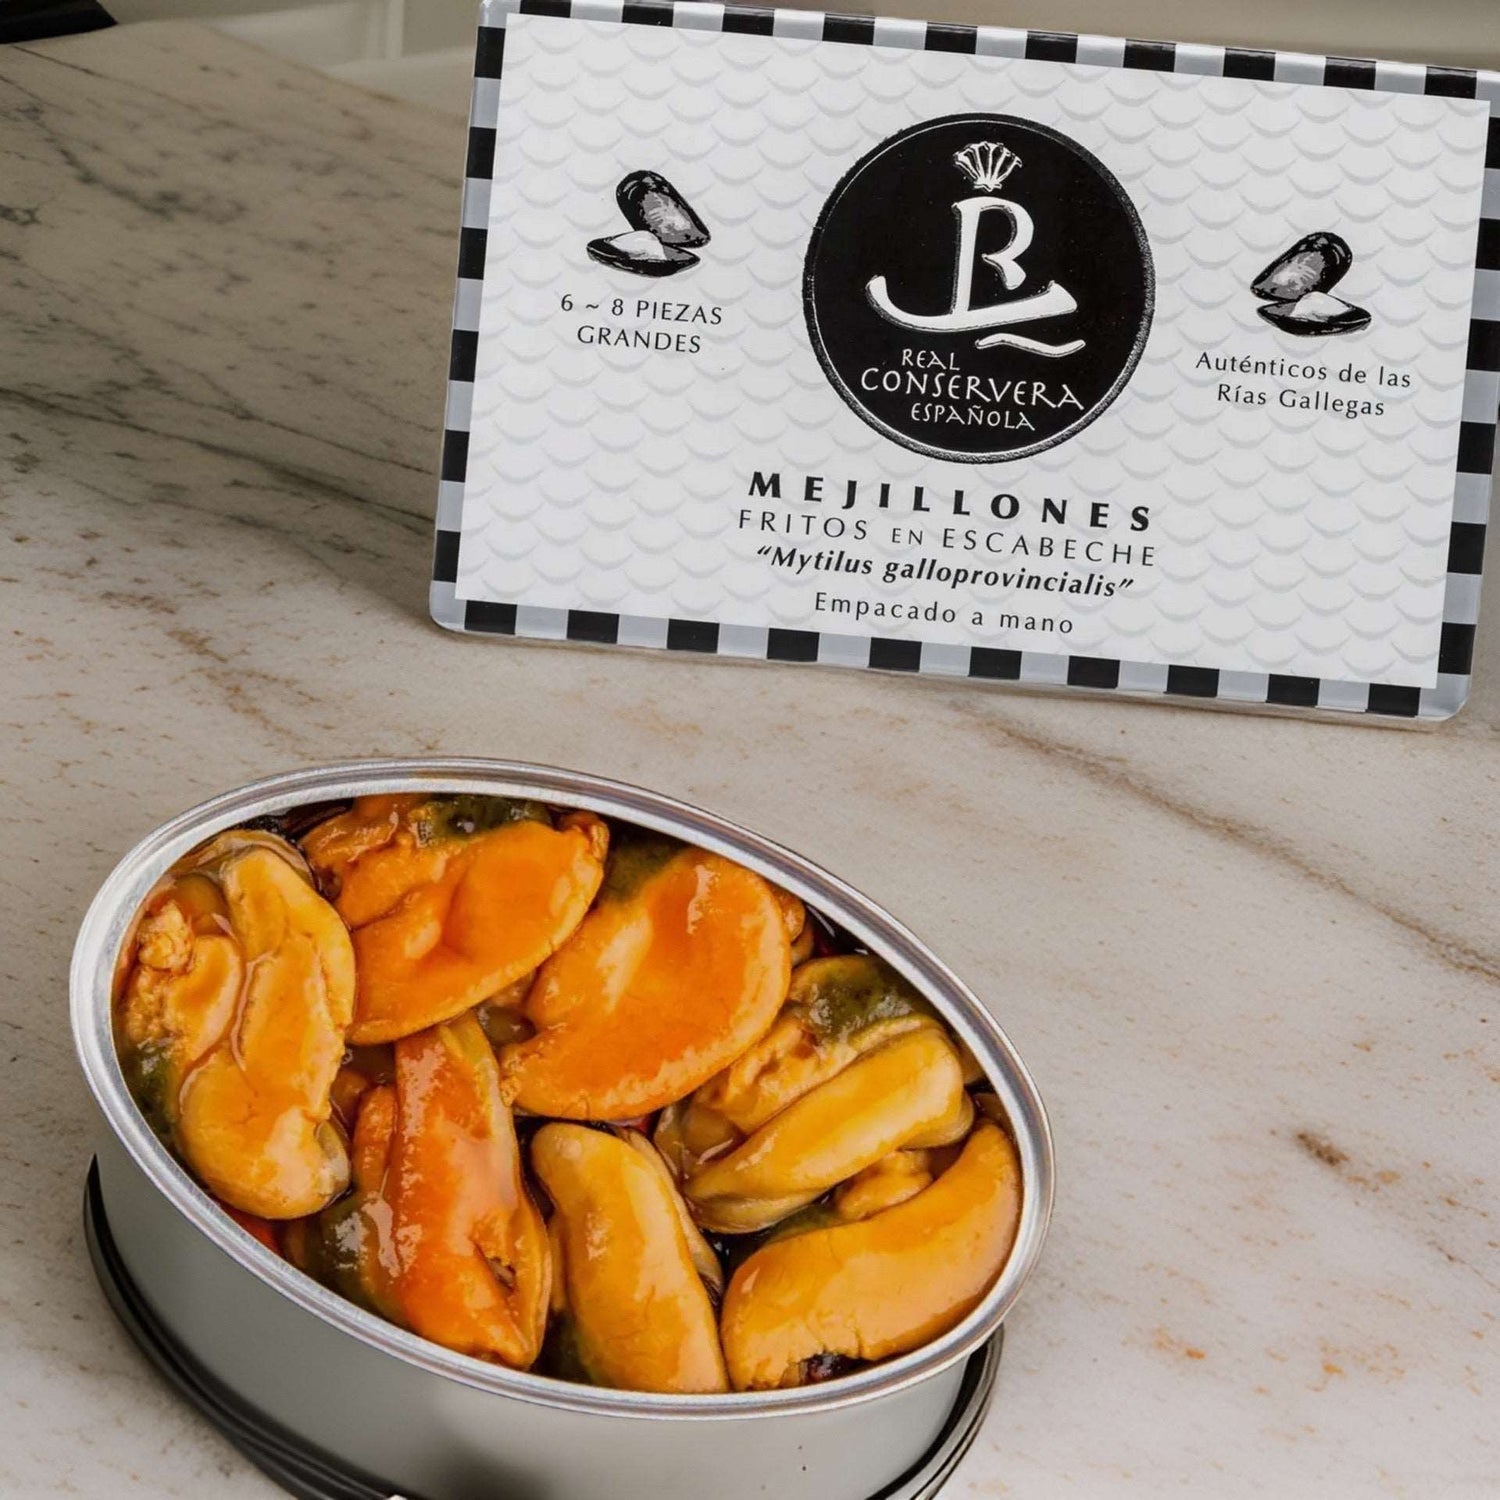 Big Mussels in Escabeche by Real Conservera